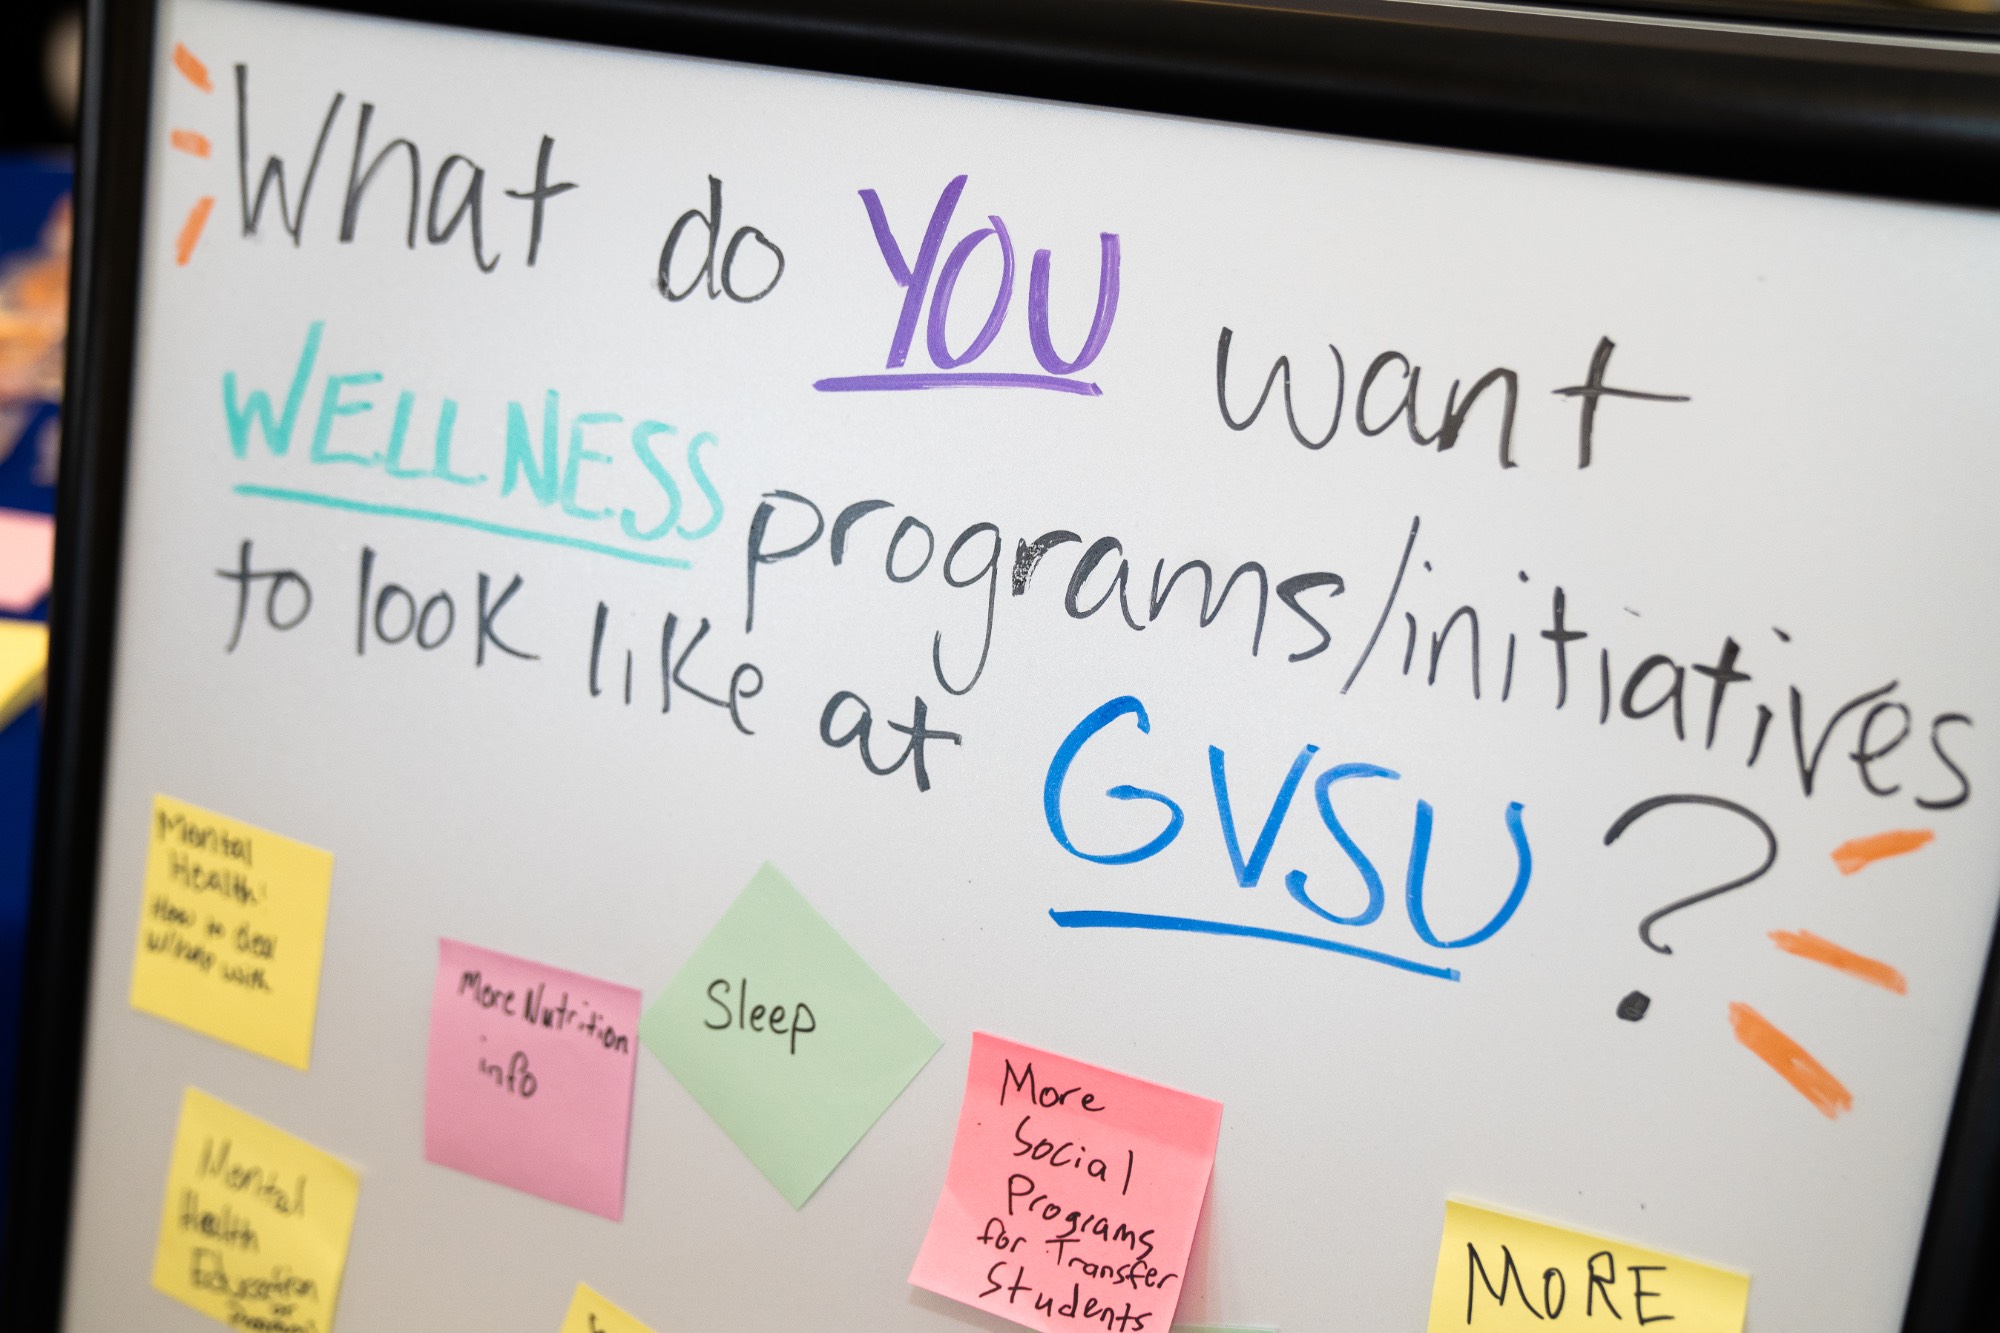 Student activity board on health and wellness